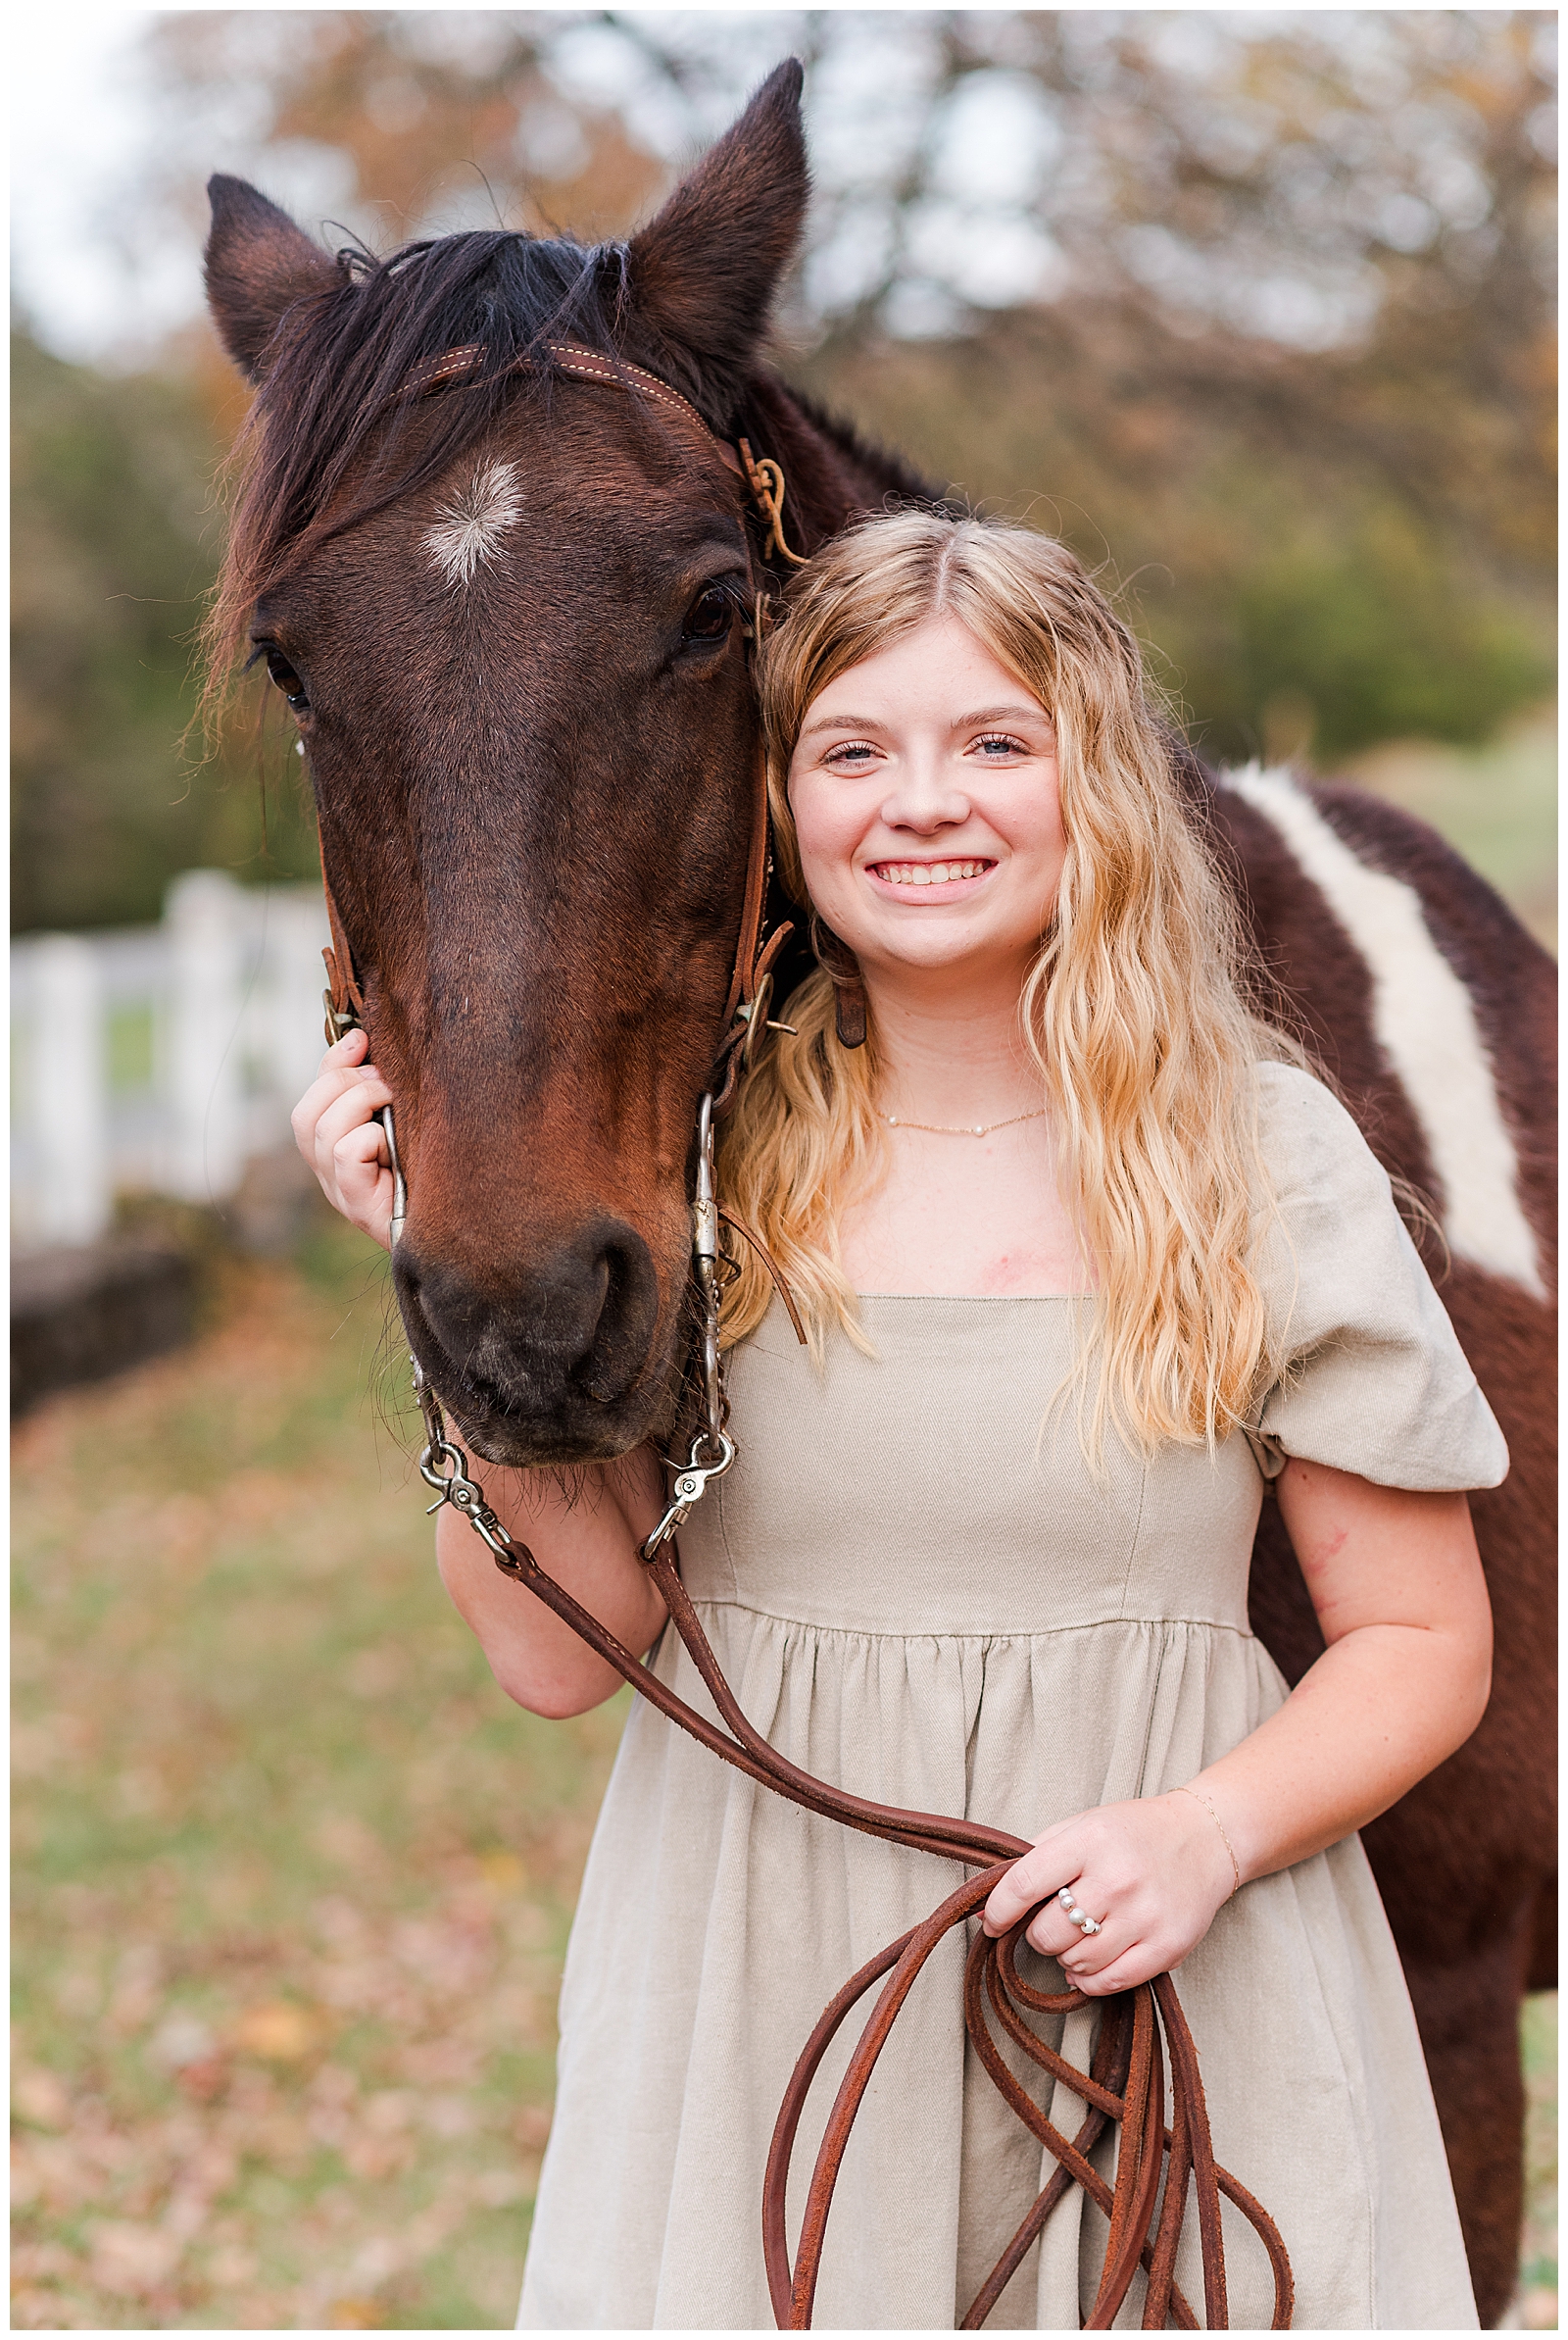 Nashville girl wearing a khaki dress, standing next to a horse during her Equine Senior Session.